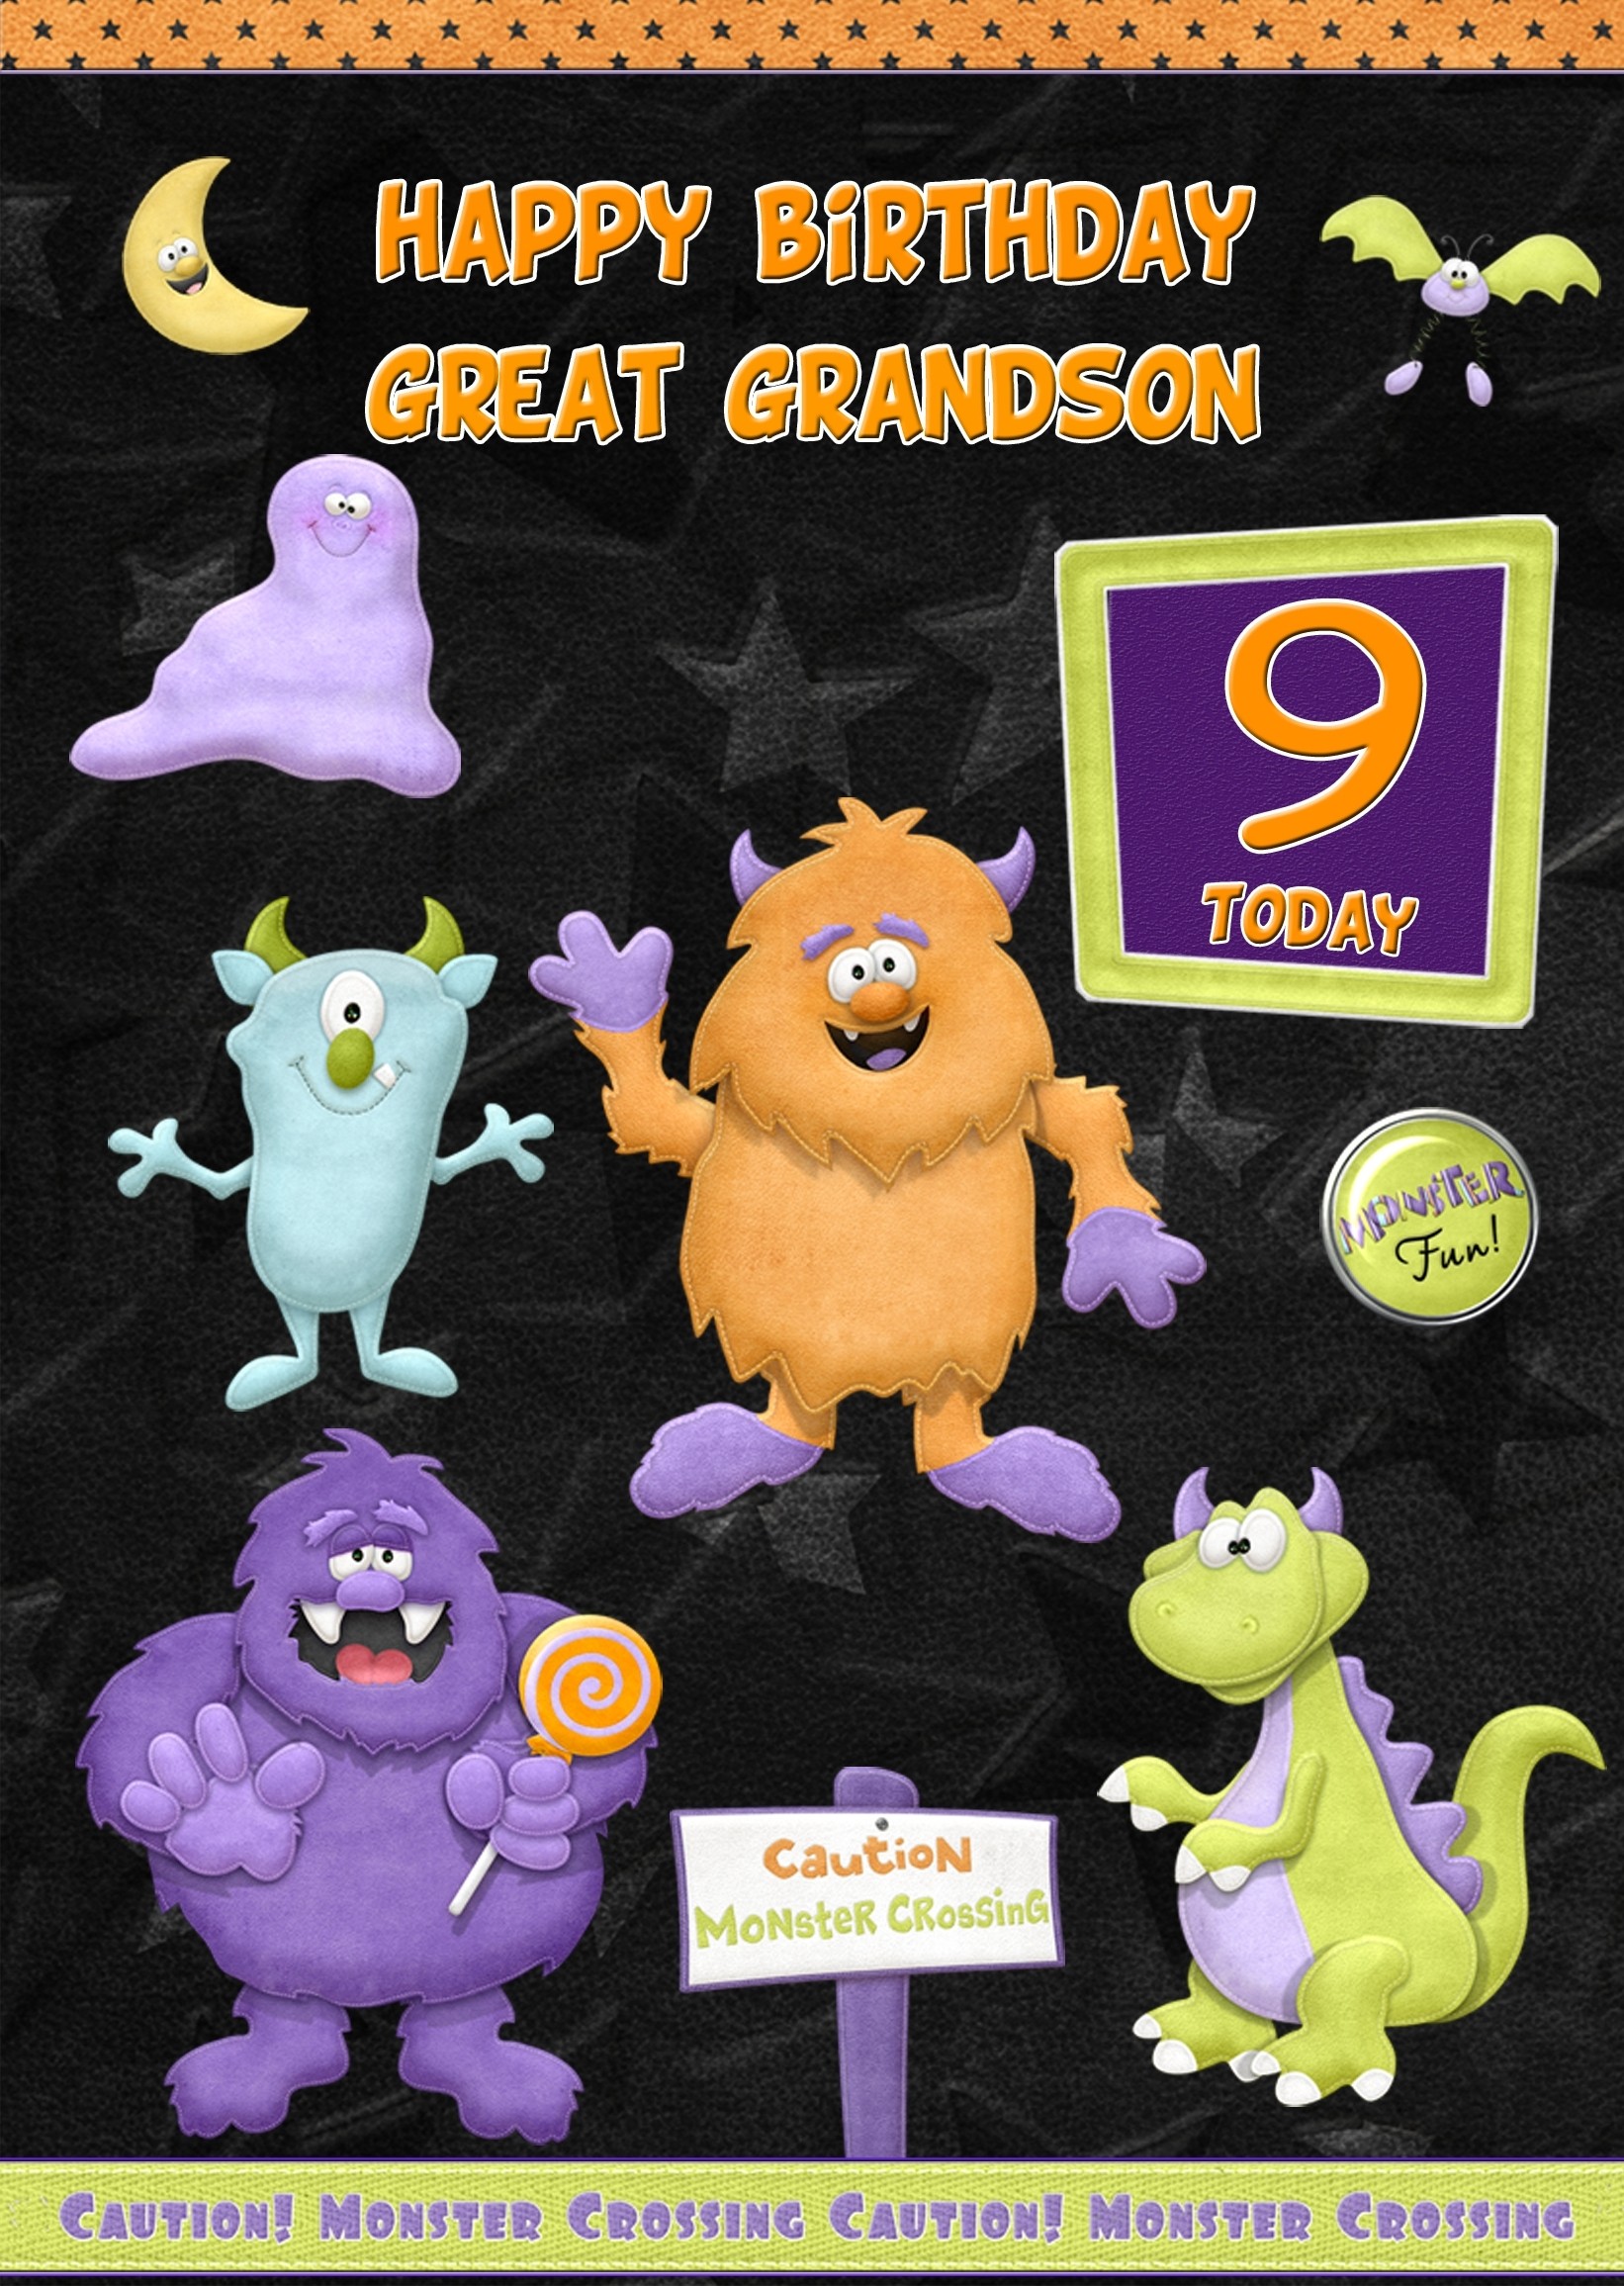 Kids 9th Birthday Funny Monster Cartoon Card for Great Grandson